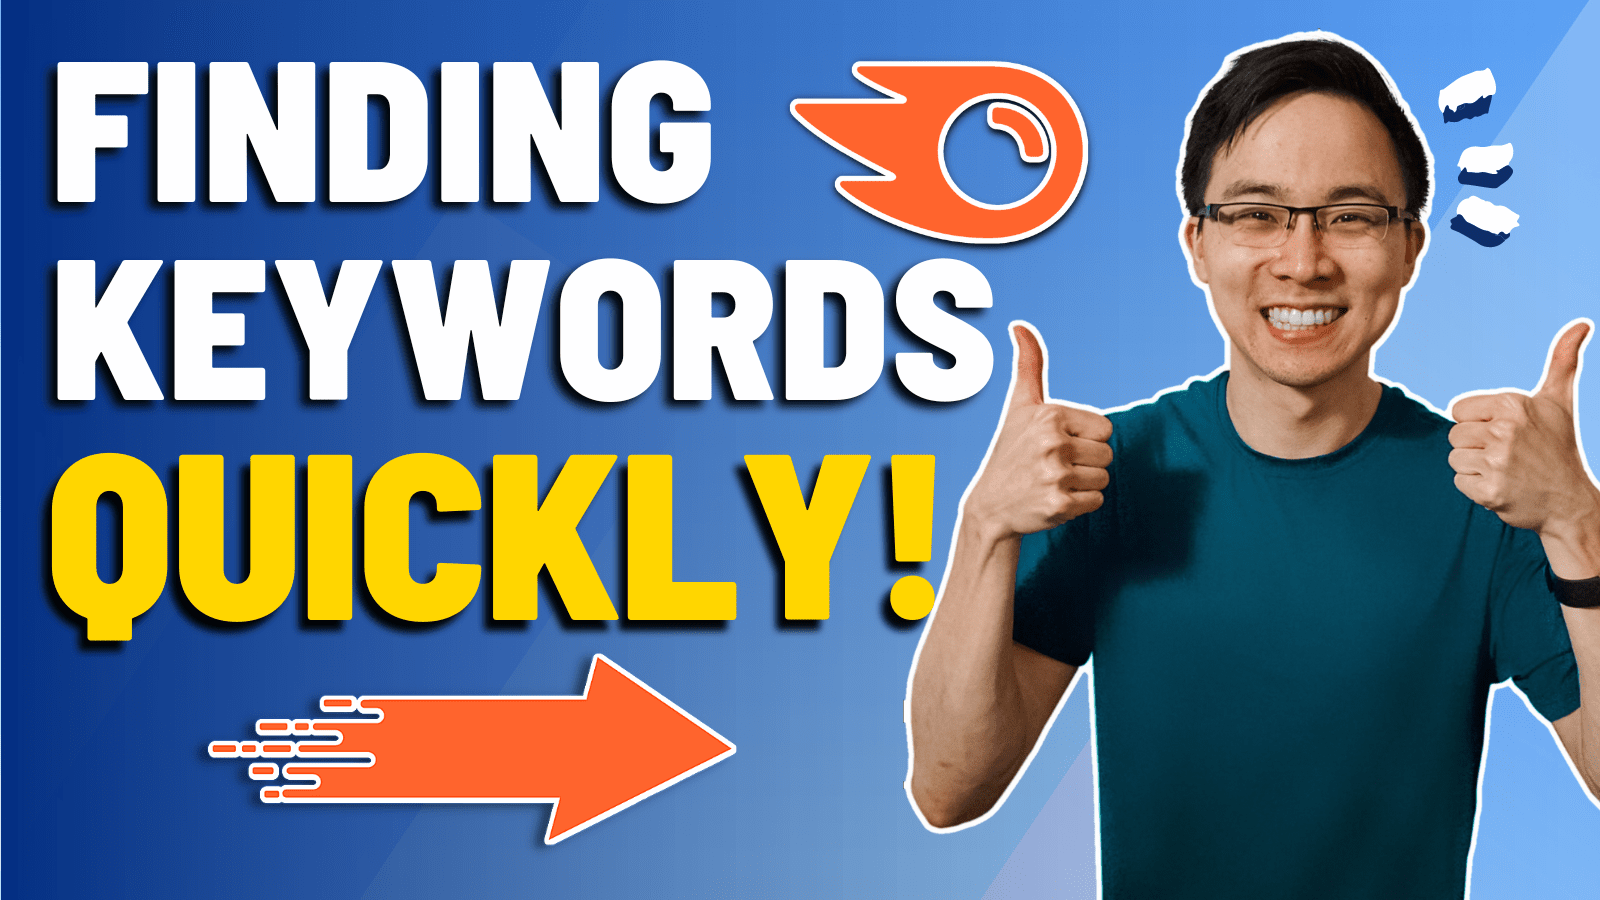 How to Find 25 Longtail Keywords with SEMRush in Under 8 Minutes